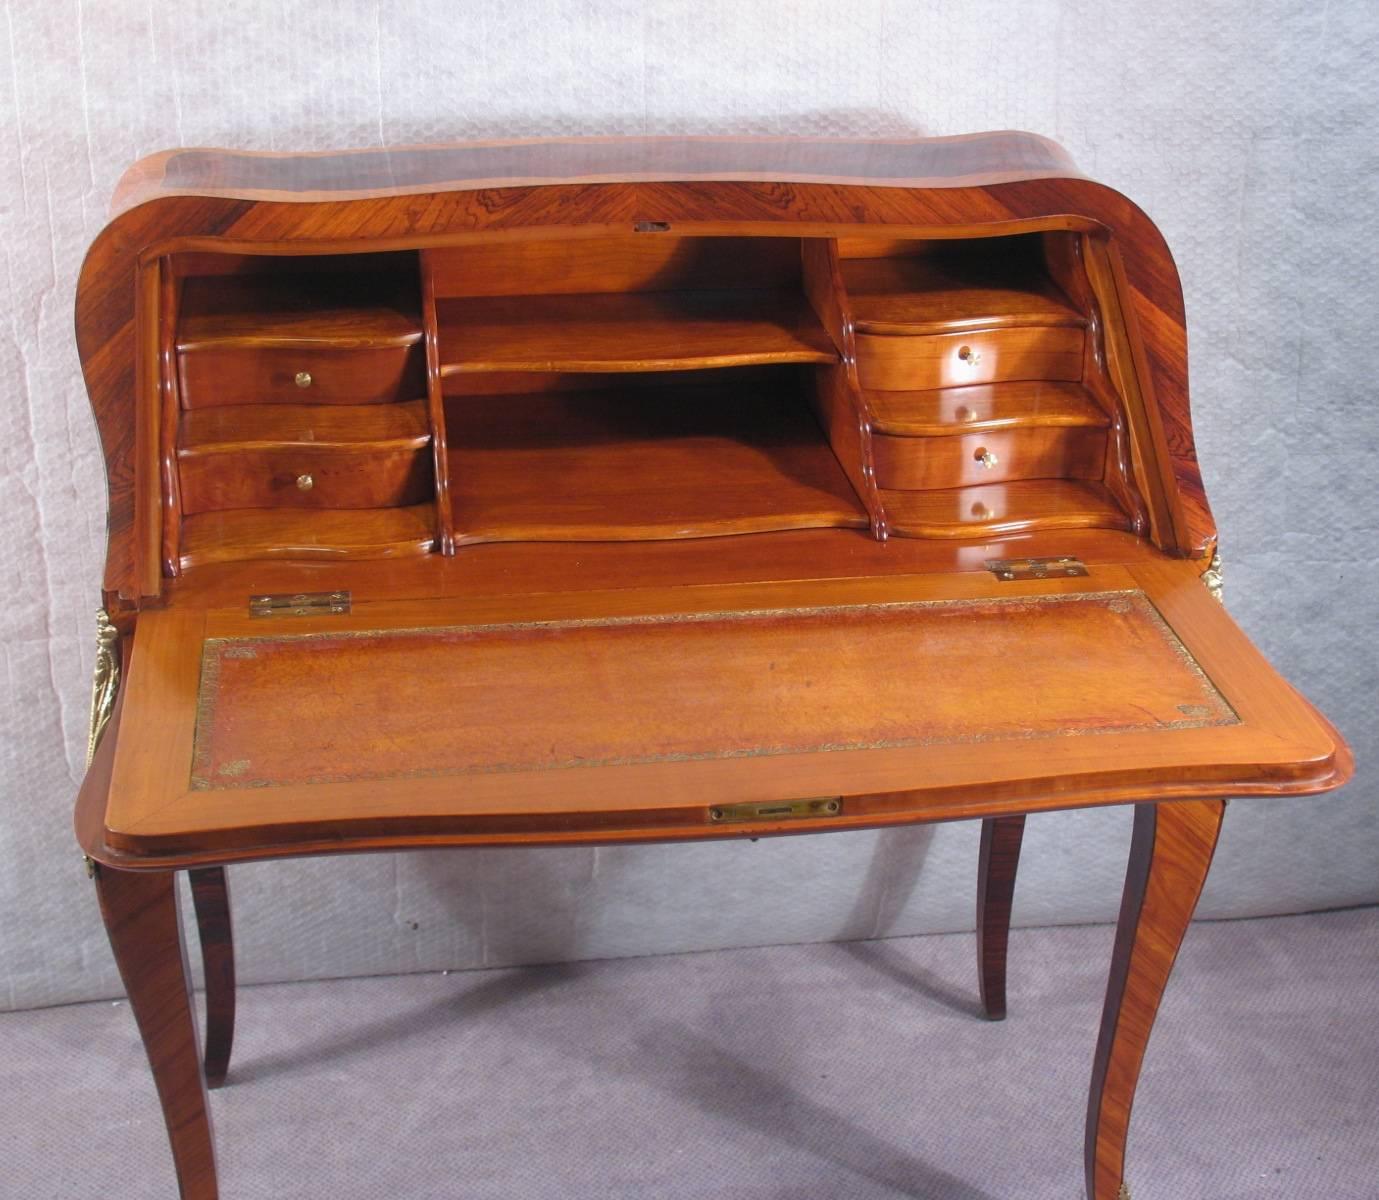 Exquisite French Louis XV style secrétaire with wave shaped front adorned with beautiful flower marquetry made of kingwood, rosewood and boxwood veneer, drop front writing desk with four interior drawers, two cubbie holes and one central shelf,